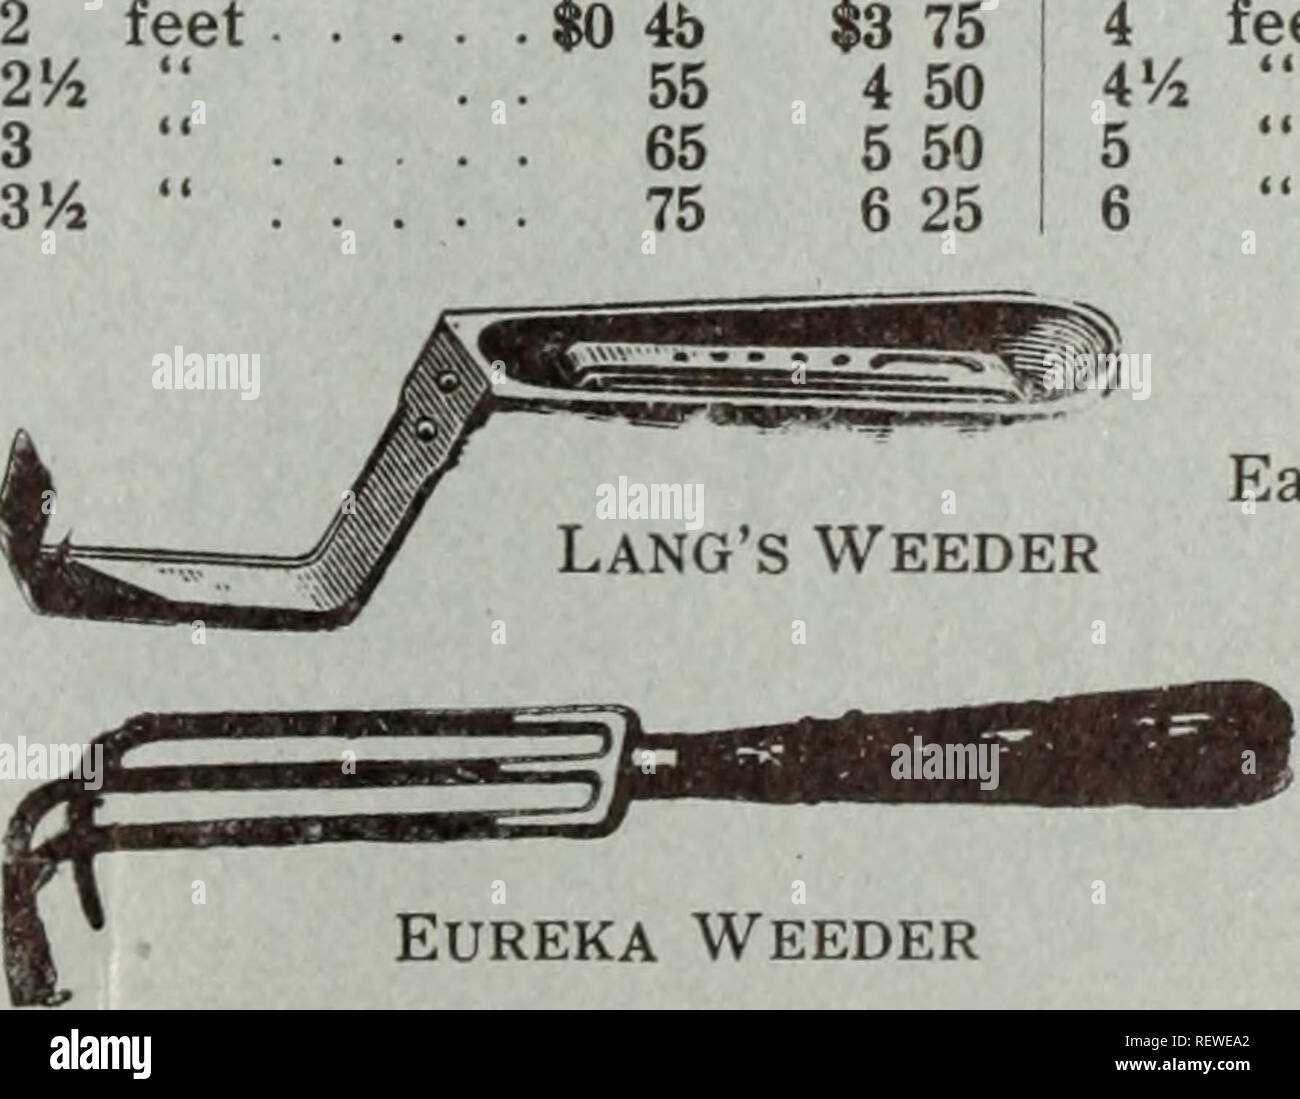 . Dreer's wholesale price list / Henry A. Dreer.. Nursery Catalogue. American Steel Trowel Wood Fibre Vases GRASS SHEARS English, 7*/2-in 85c. with spring . fl.OO American, 25c., 35c., 50c. and 75c. TROWELS Steel, 6-in., 25c.; dozen, $2.50 English Pattern, 6-in. . 35c. 7-in. 40c. Plant Stakes, Square, Tapering, Painted Green The 3 to 6 feet are suitable for Dahlias and large plants. l'/Â« feet 2 2'/2 &quot; 3 Per doz. $0 10 18 27 36 Per 100 $0 77 1 12 1 58 2 25 3'/2 feet 4 5 Per doz. $0 45 54 68 90 Per 100 $3 00 3 75 5 00 6 00 Plant Stakes, Round Light tapering, round, painted green: Per doz.  Stock Photo